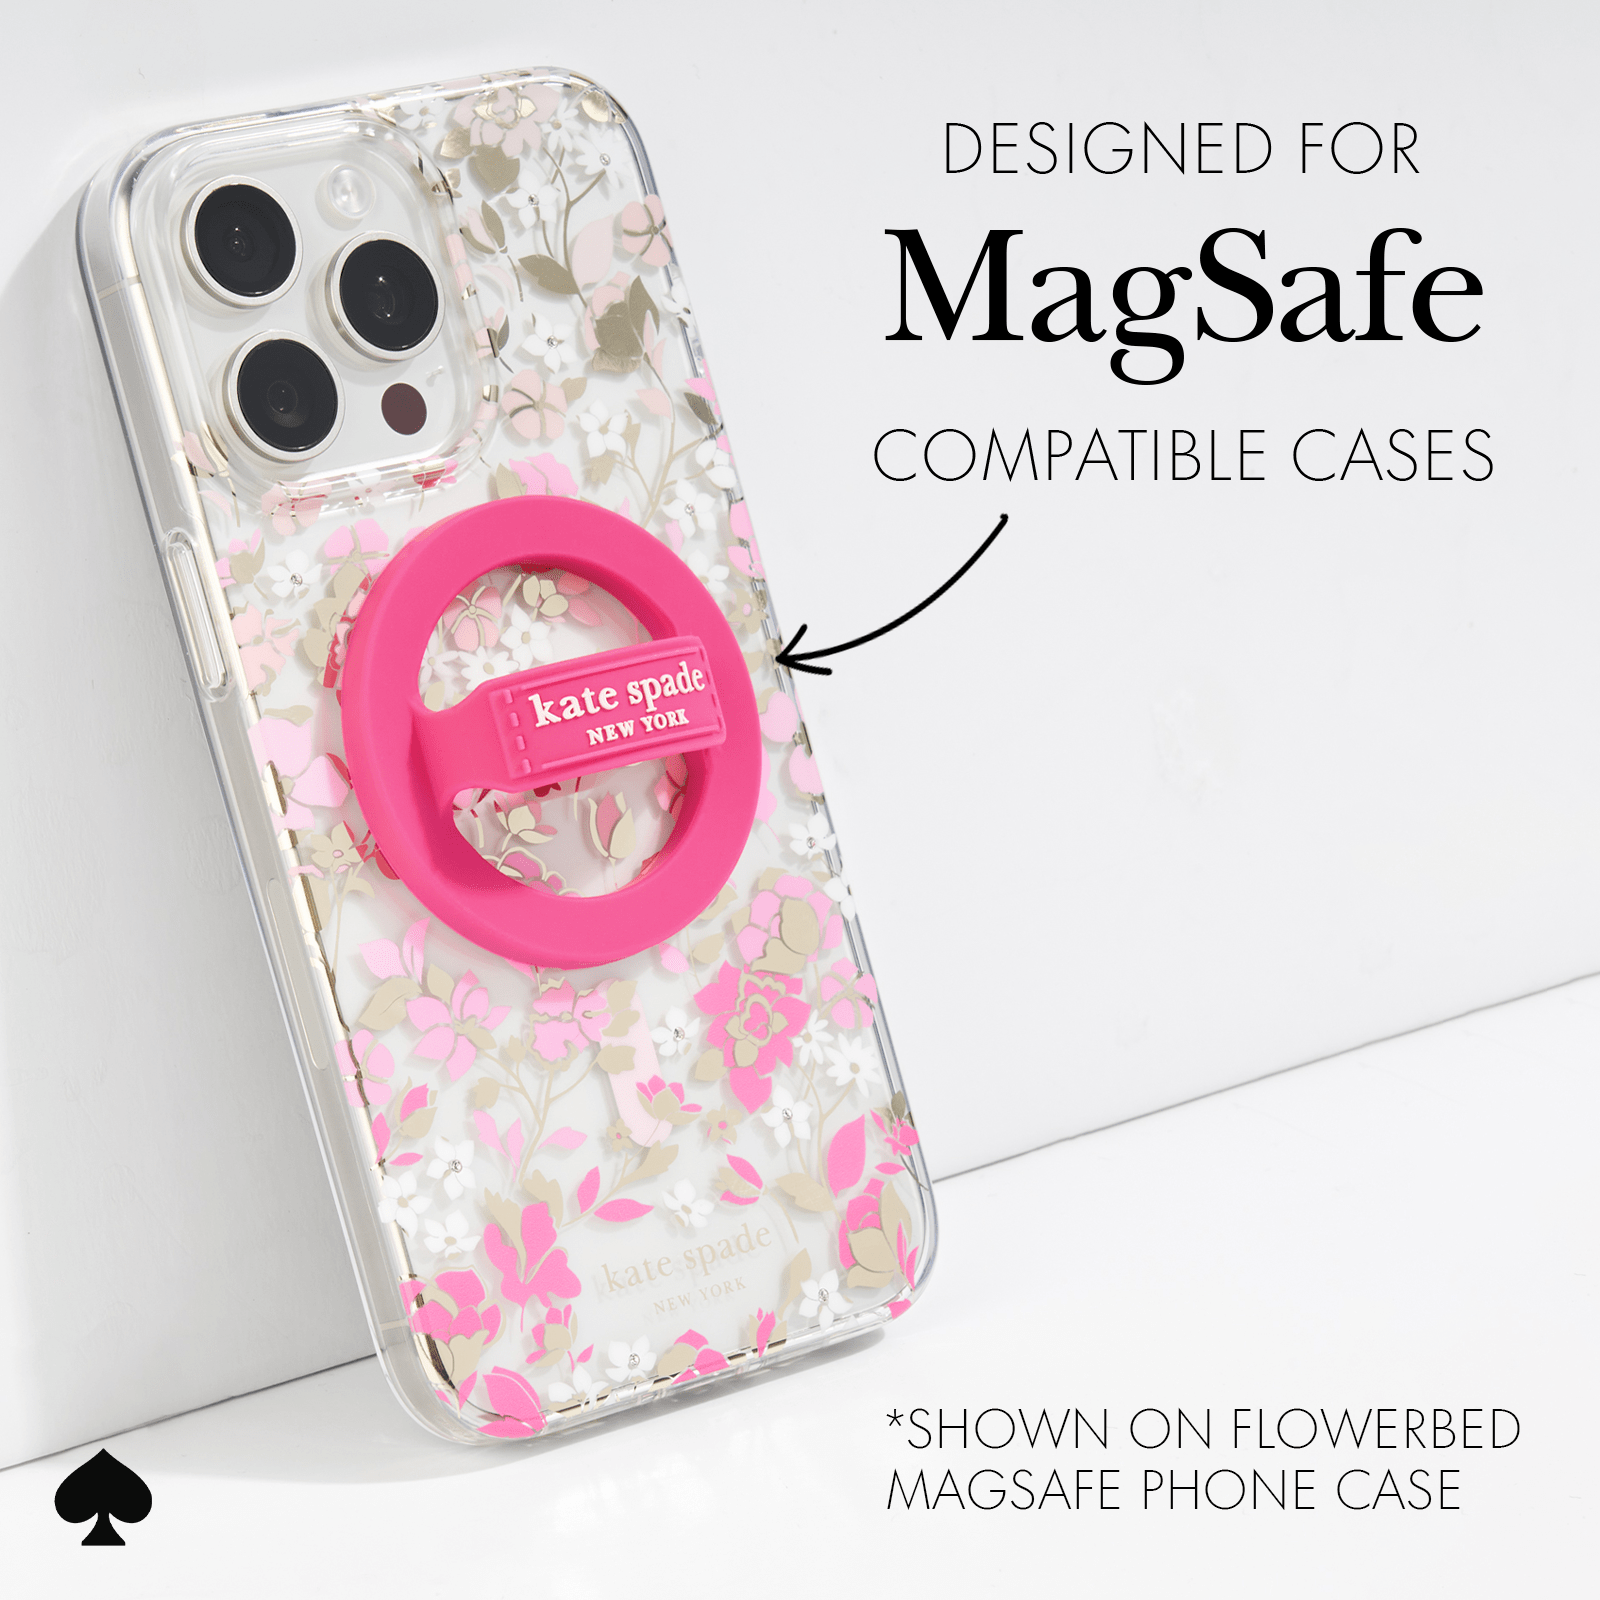 DESIGNED FOR MAGSAFE COMPATIBLE CASES. *SHOWN ON FLOWERBED MAGSAFE PHONE CASE